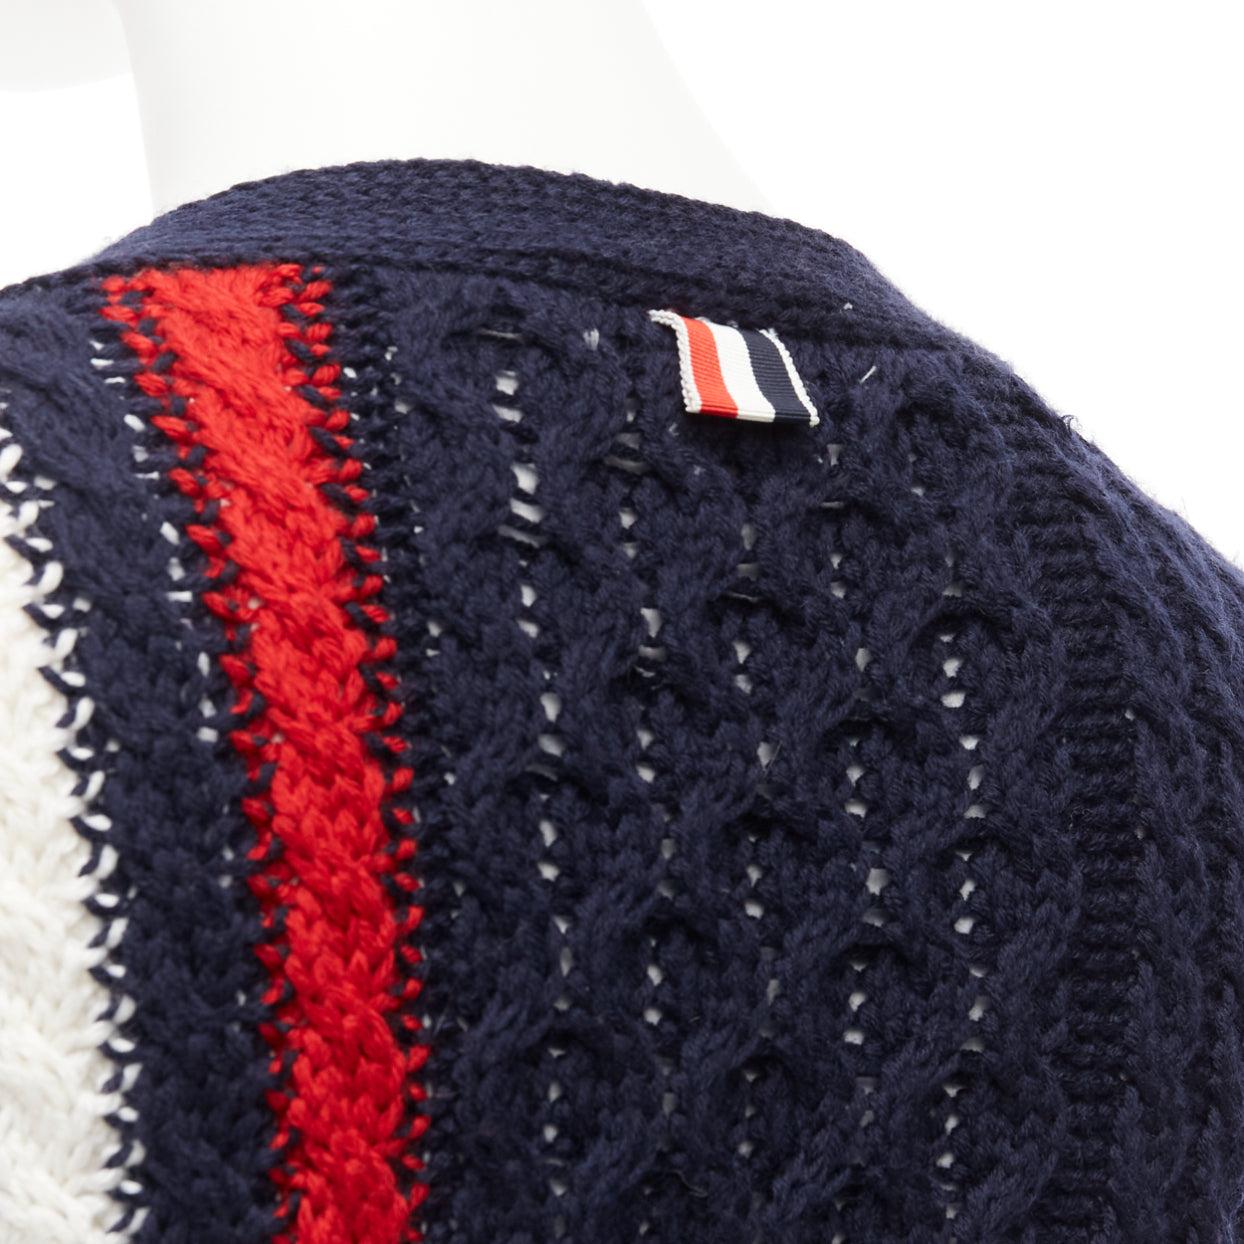 THOM BROWNE navy red white wool aran cable knit cardigan sweater IT40 S
Reference: DYTG/A00053
Brand: Thom Browne
Designer: Thom Browne
Material: Wool
Color: Navy, Red
Pattern: Striped
Closure: Button
Extra Details: Red white knitted detail at